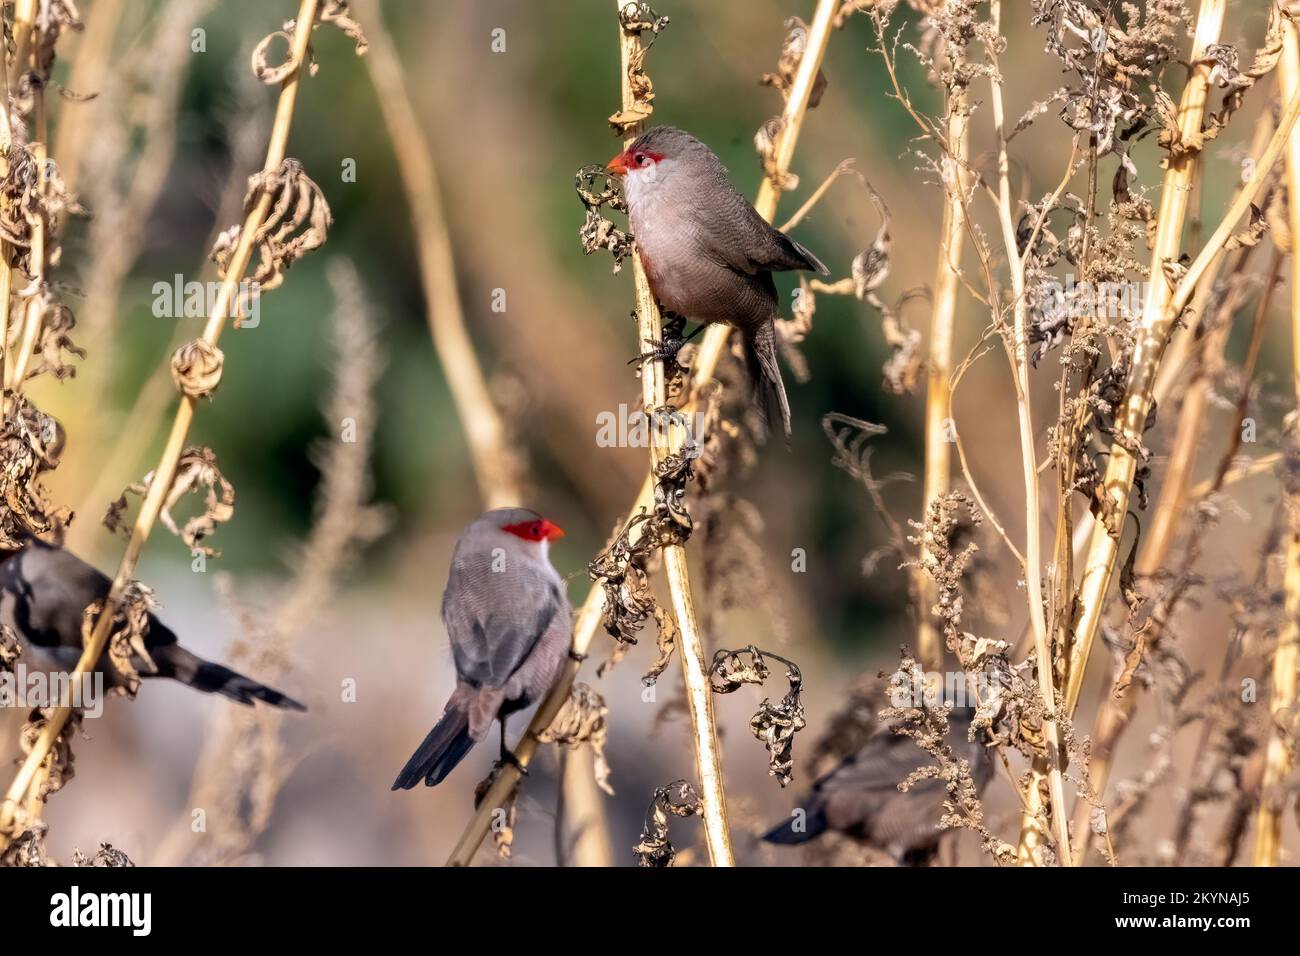 Common Waxbill also known as St Helena waxbill, flocking at the dry riverbed at the Rio Jate, Laheradurra, Andalucia, Spain. 27th November 2022 Stock Photo